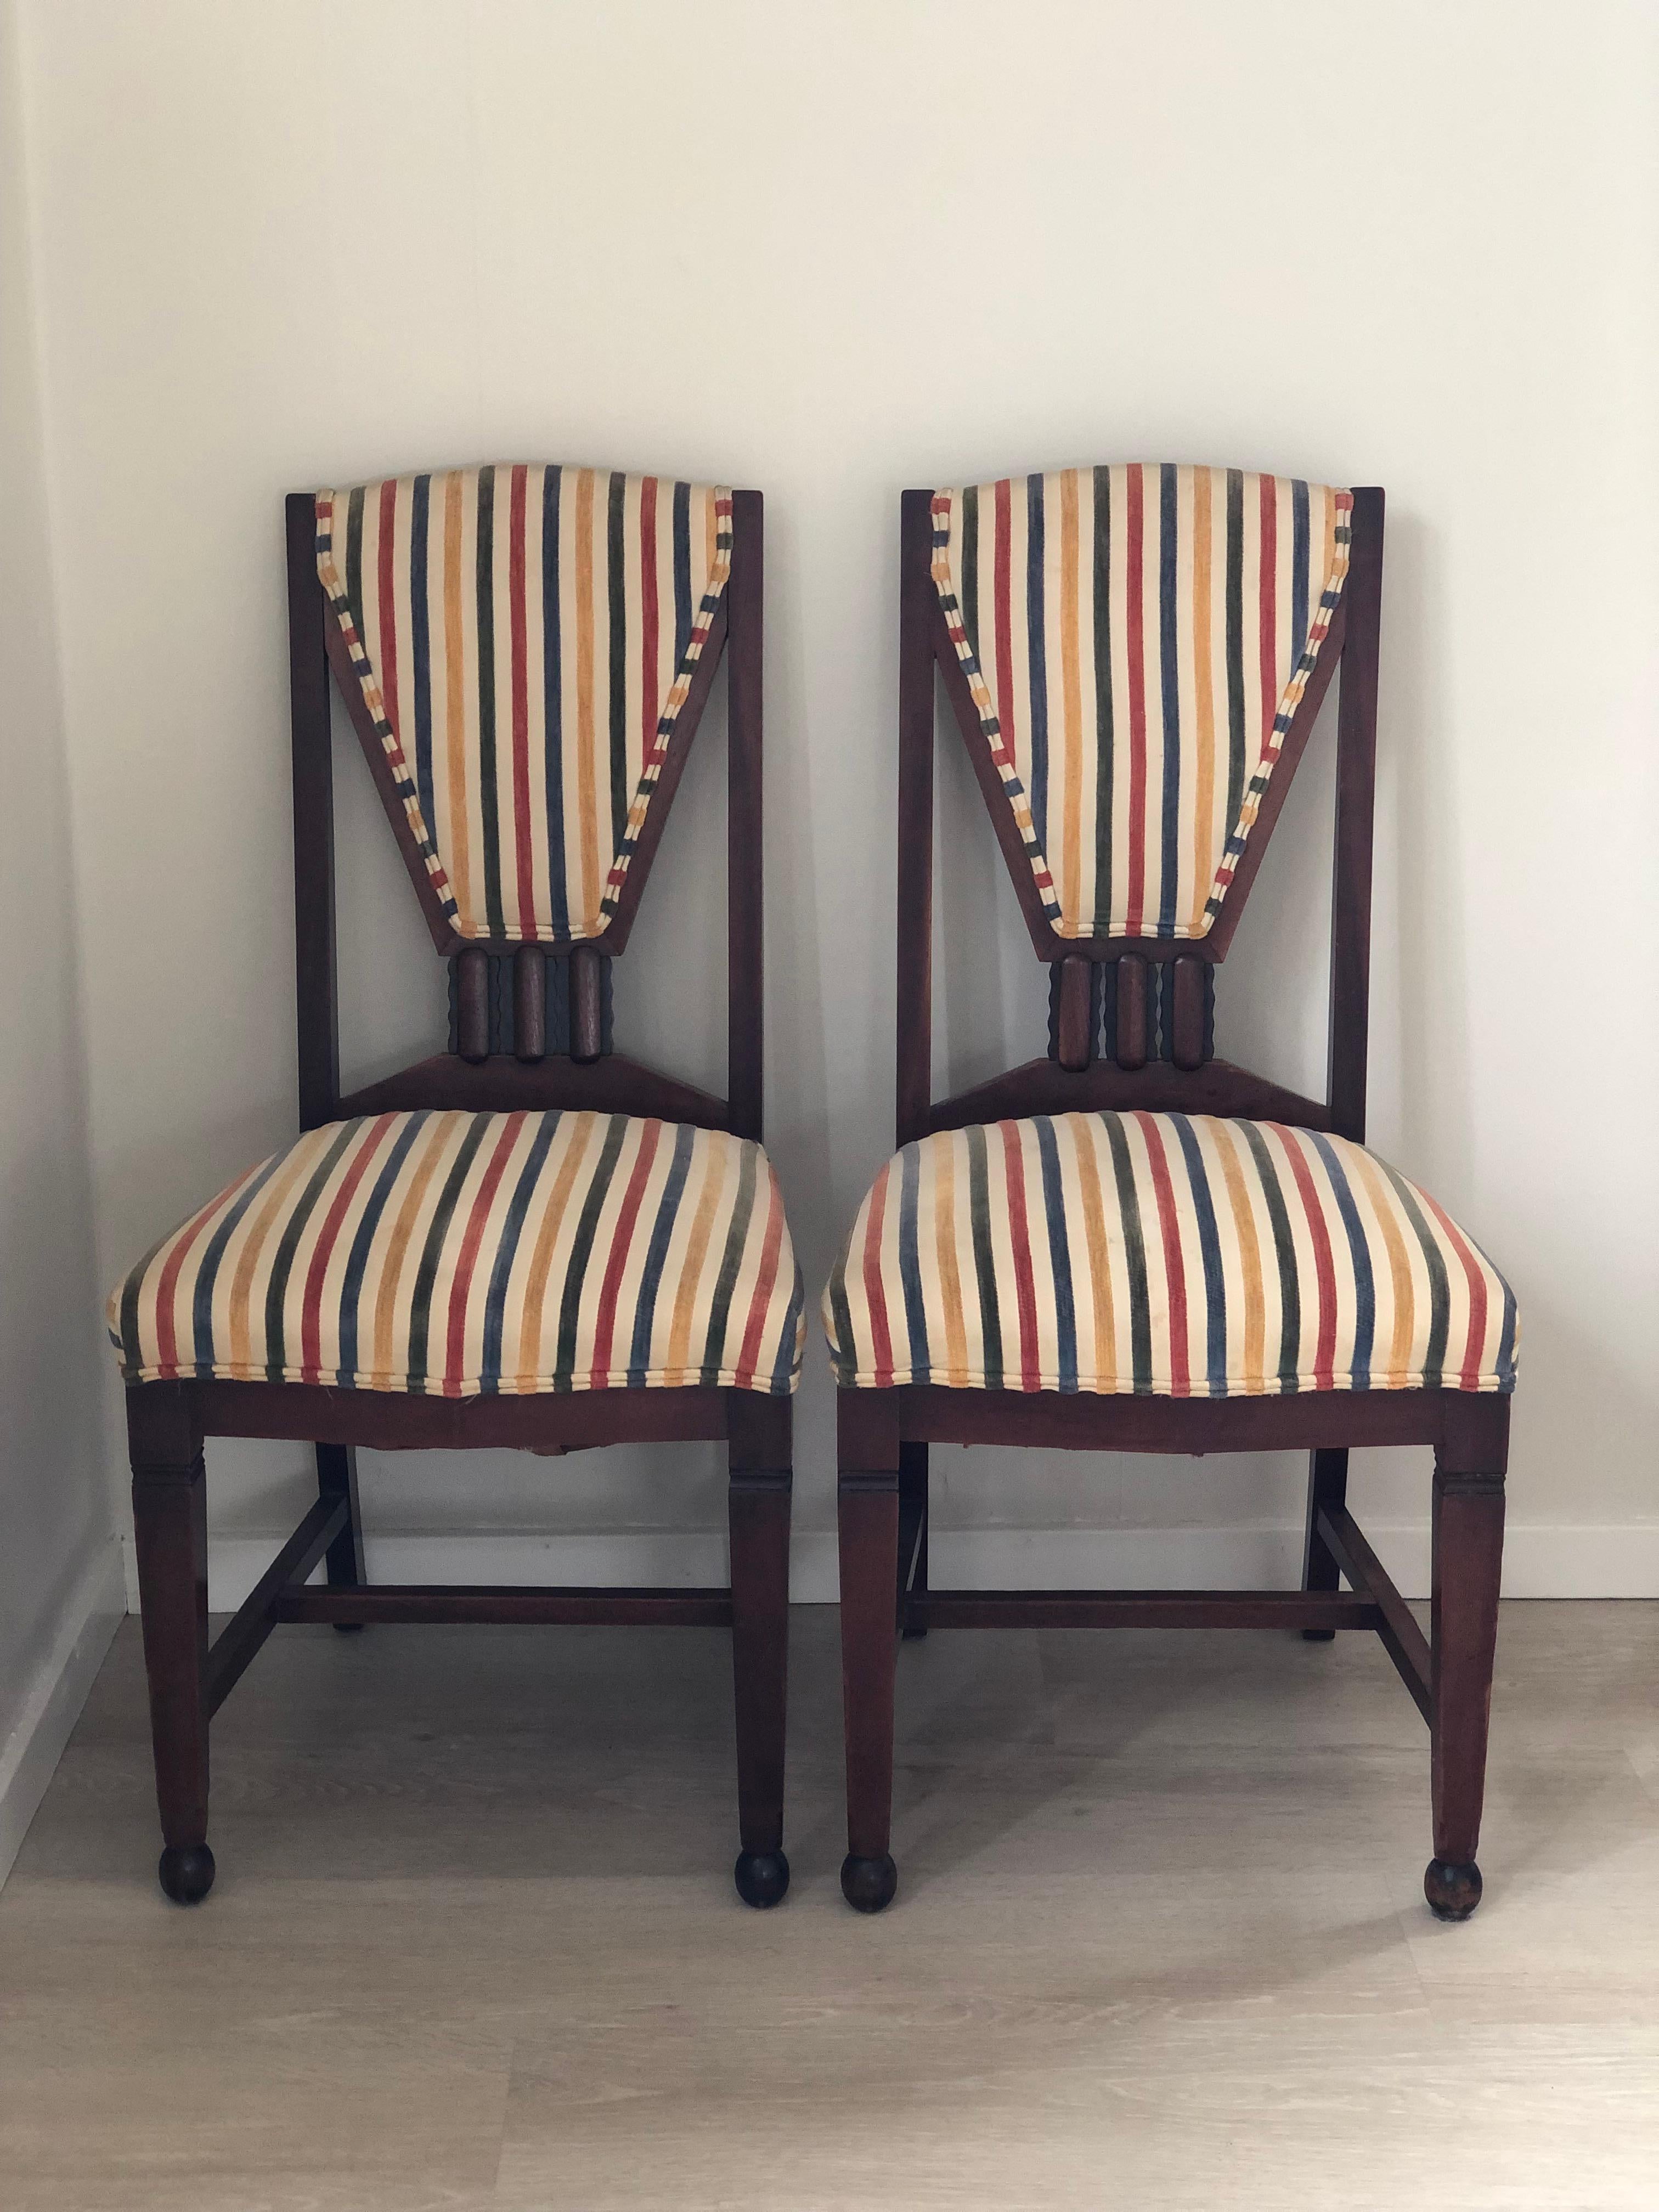 A unique Art Deco set of Amsterdam school chairs of high quality craftsmanship from the Netherlands, 1930s. The chairs were designed and made by furniture manufacturer 't Woonhuys from Amsterdam. Detailed chairs with unique shapes in mahogany and